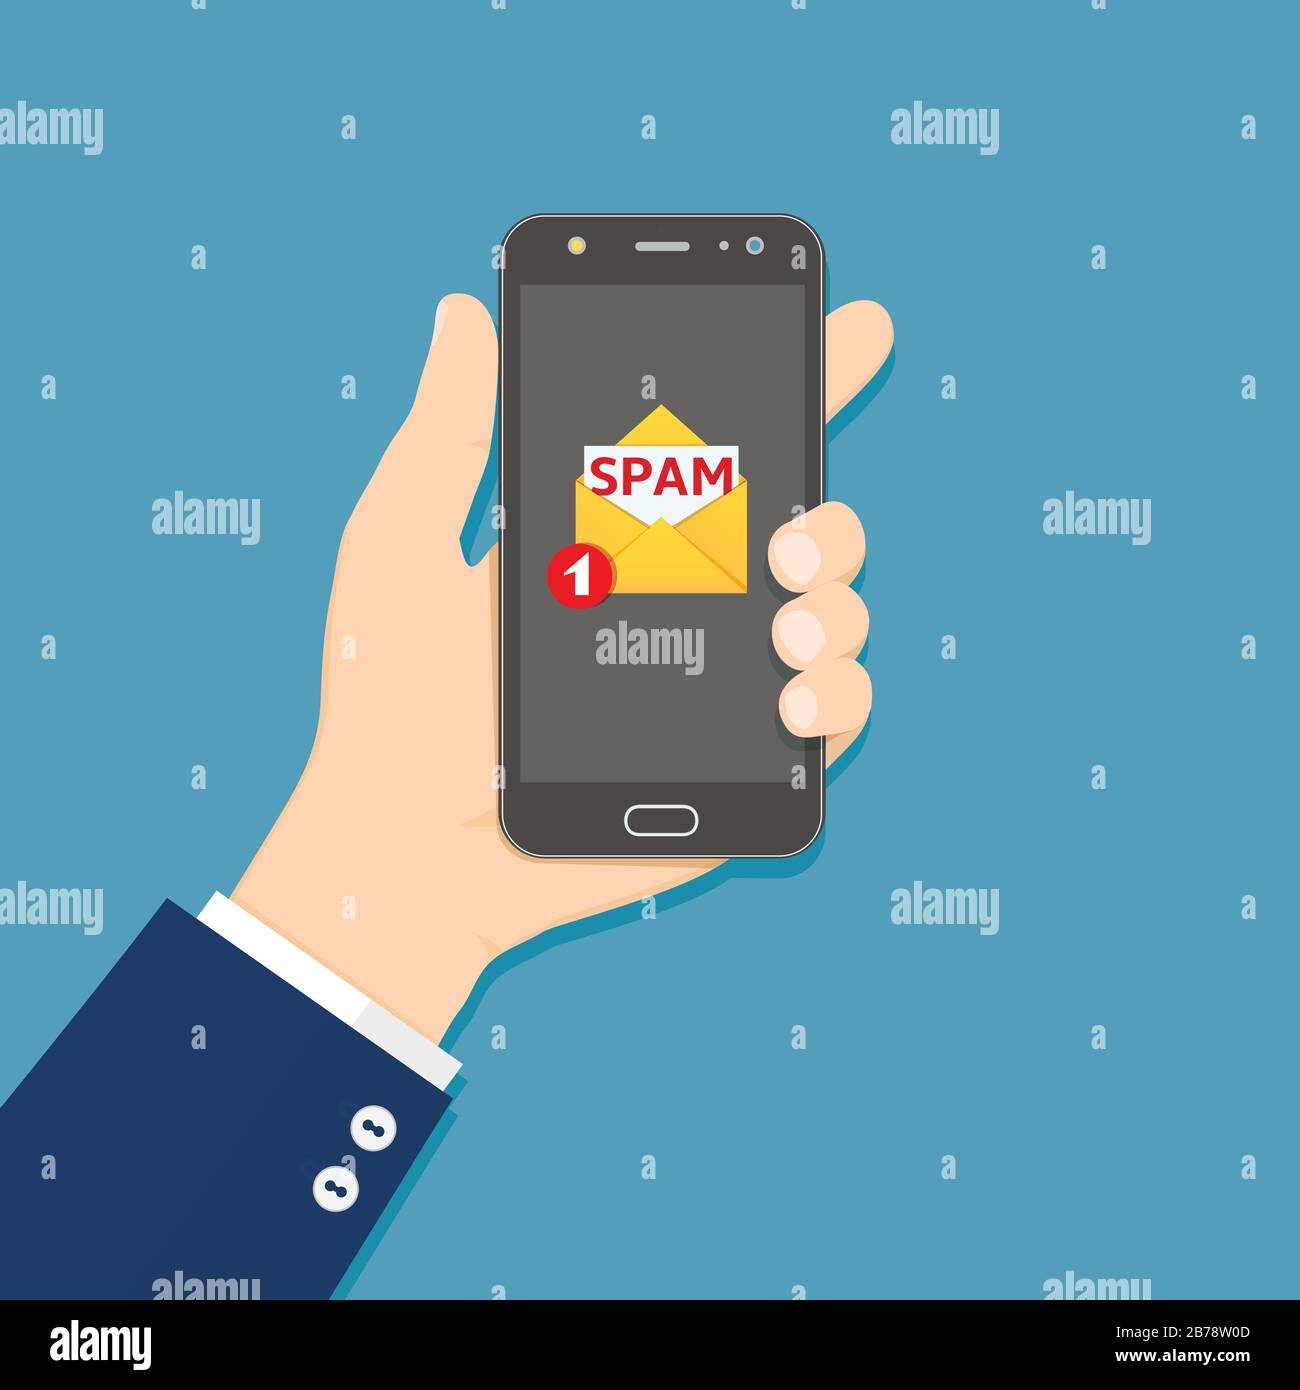 Hand holding smartphone with spam email on screen. Concept of spam email notification in mobile phone. Vector illustration in flat style. Stock Vector